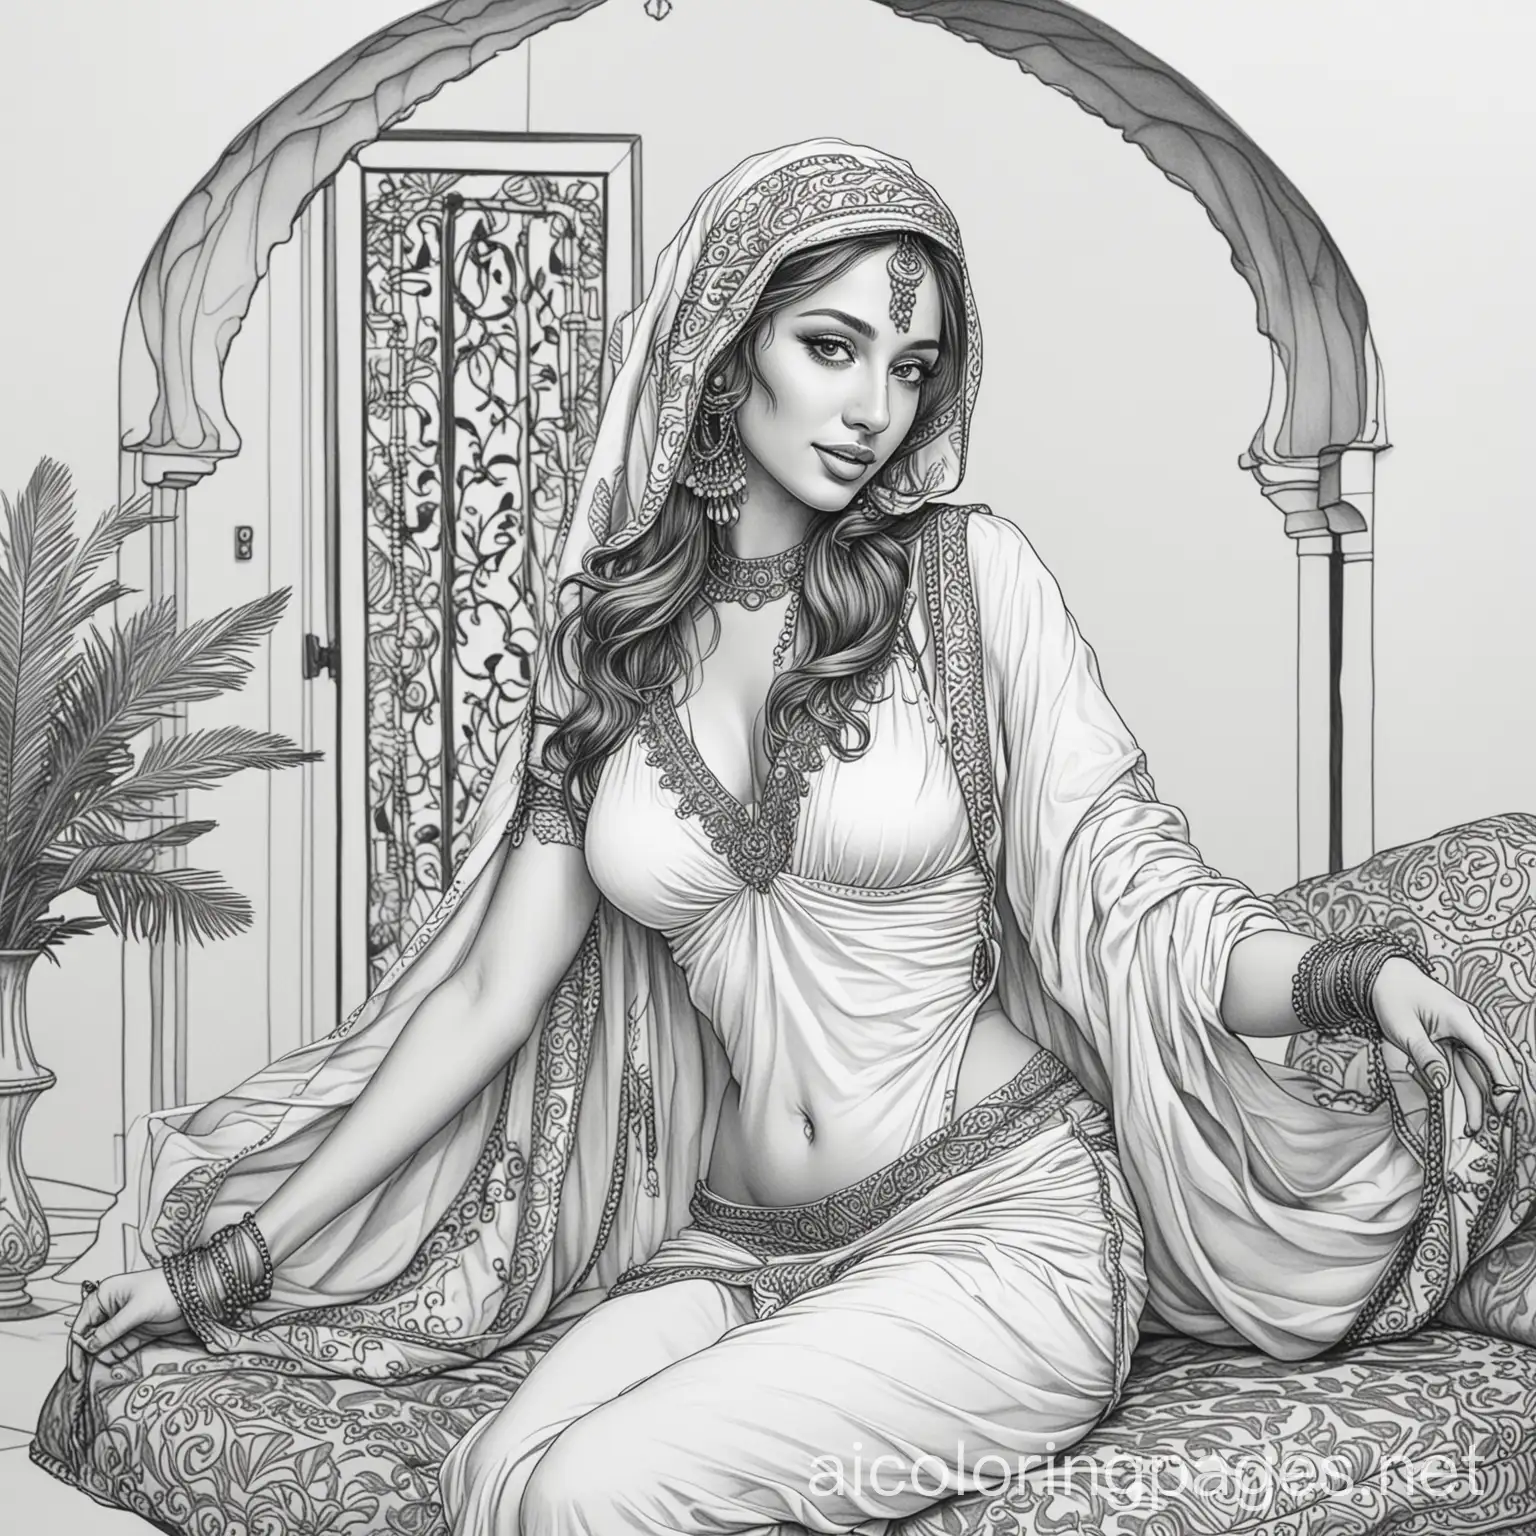 Brothel, prostitutes, Arabian, exotic, Coloring Page, black and white, line art, white background, Simplicity, Ample White Space. The background of the coloring page is plain white to make it easy for young children to color within the lines. The outlines of all the subjects are easy to distinguish, making it simple for kids to color without too much difficulty